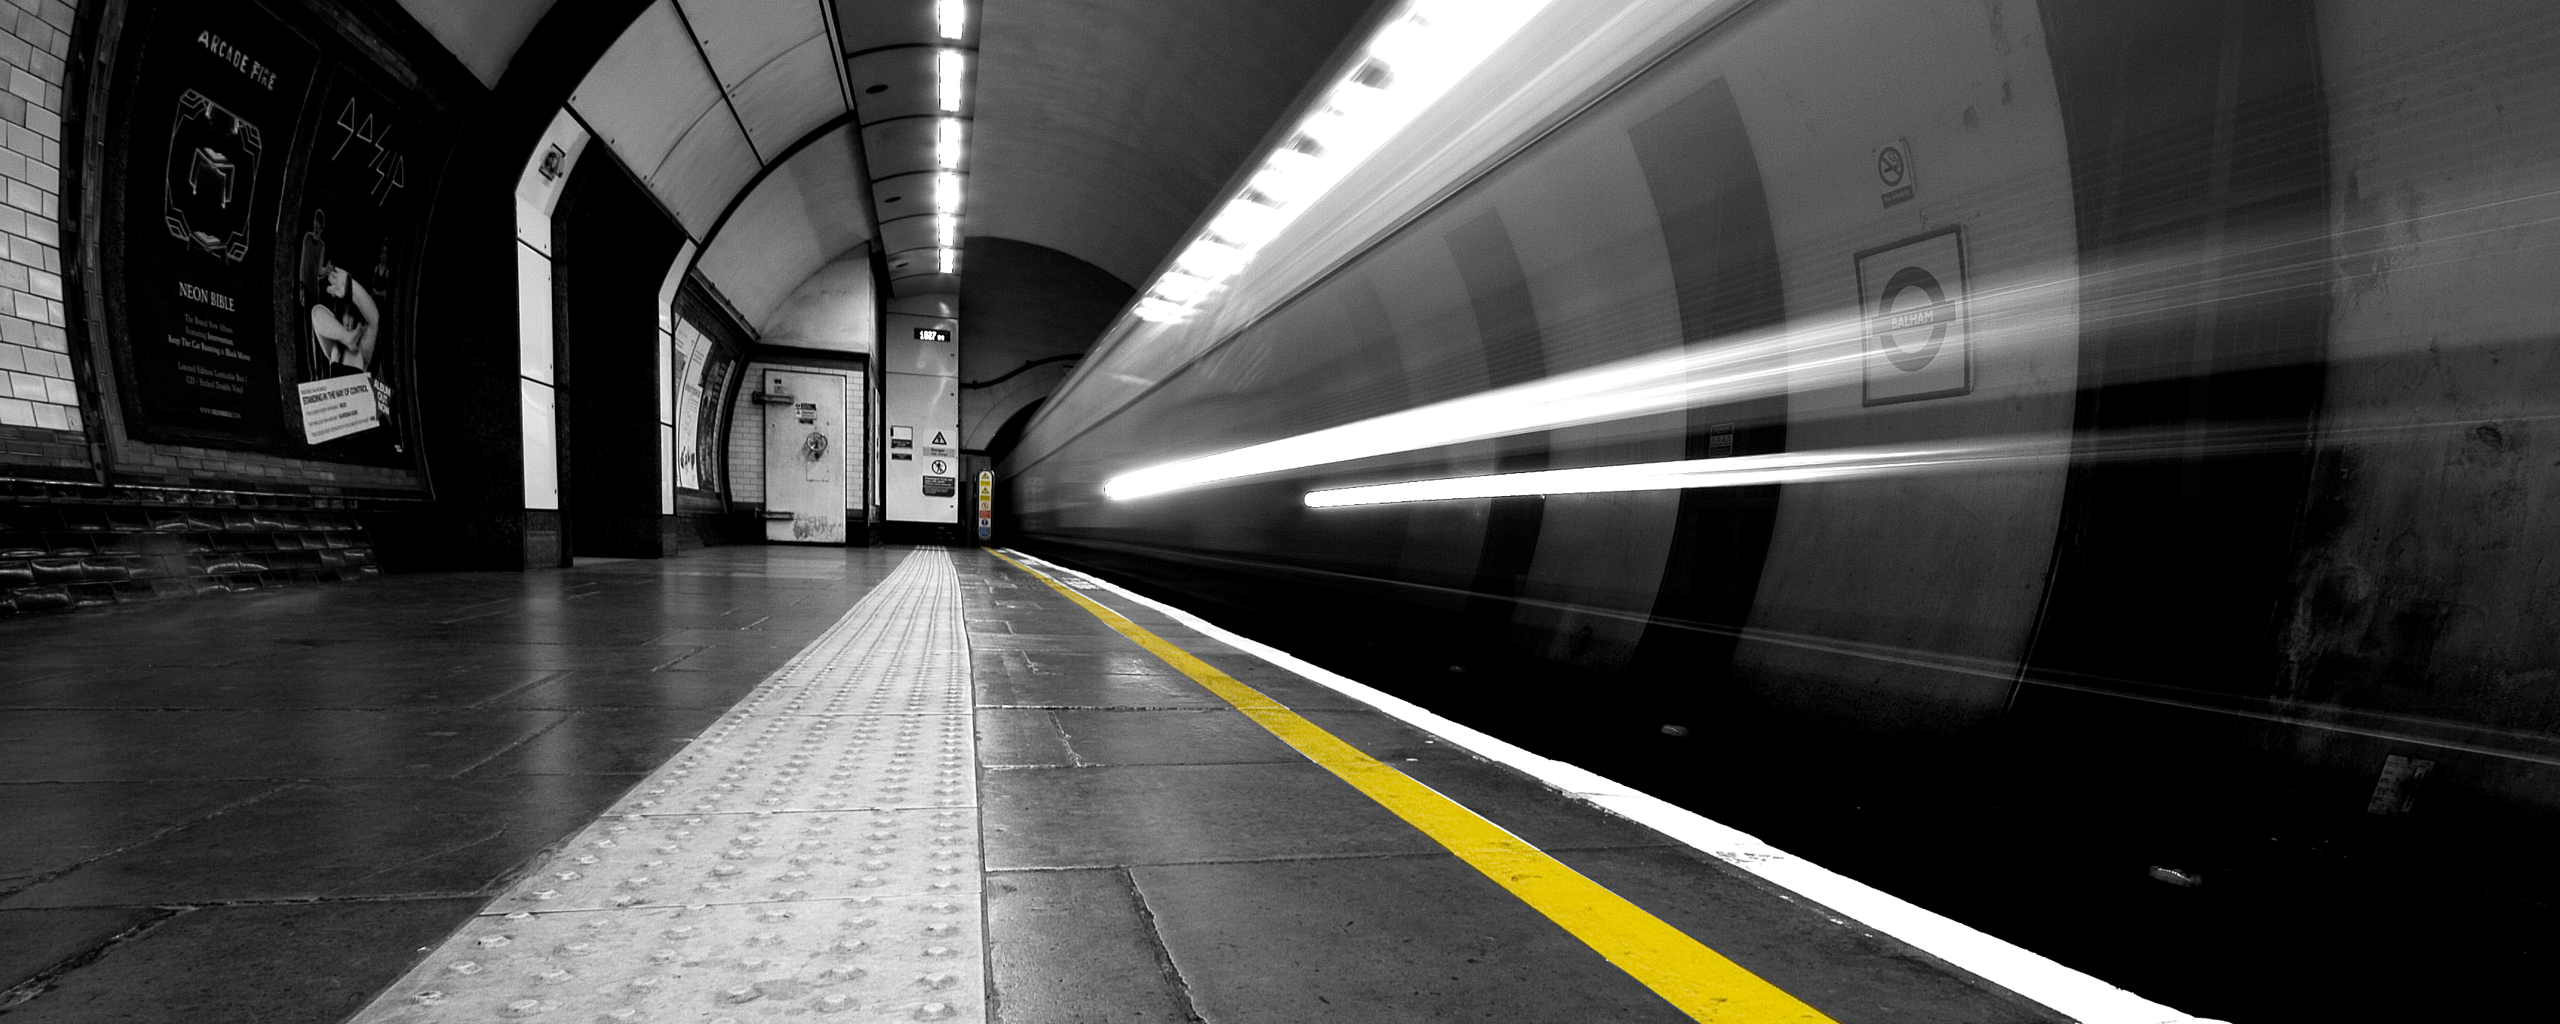 General 2560x1024 subway yellow long exposure London tubes city selective coloring light trails tunnel multiple display train station motion blur